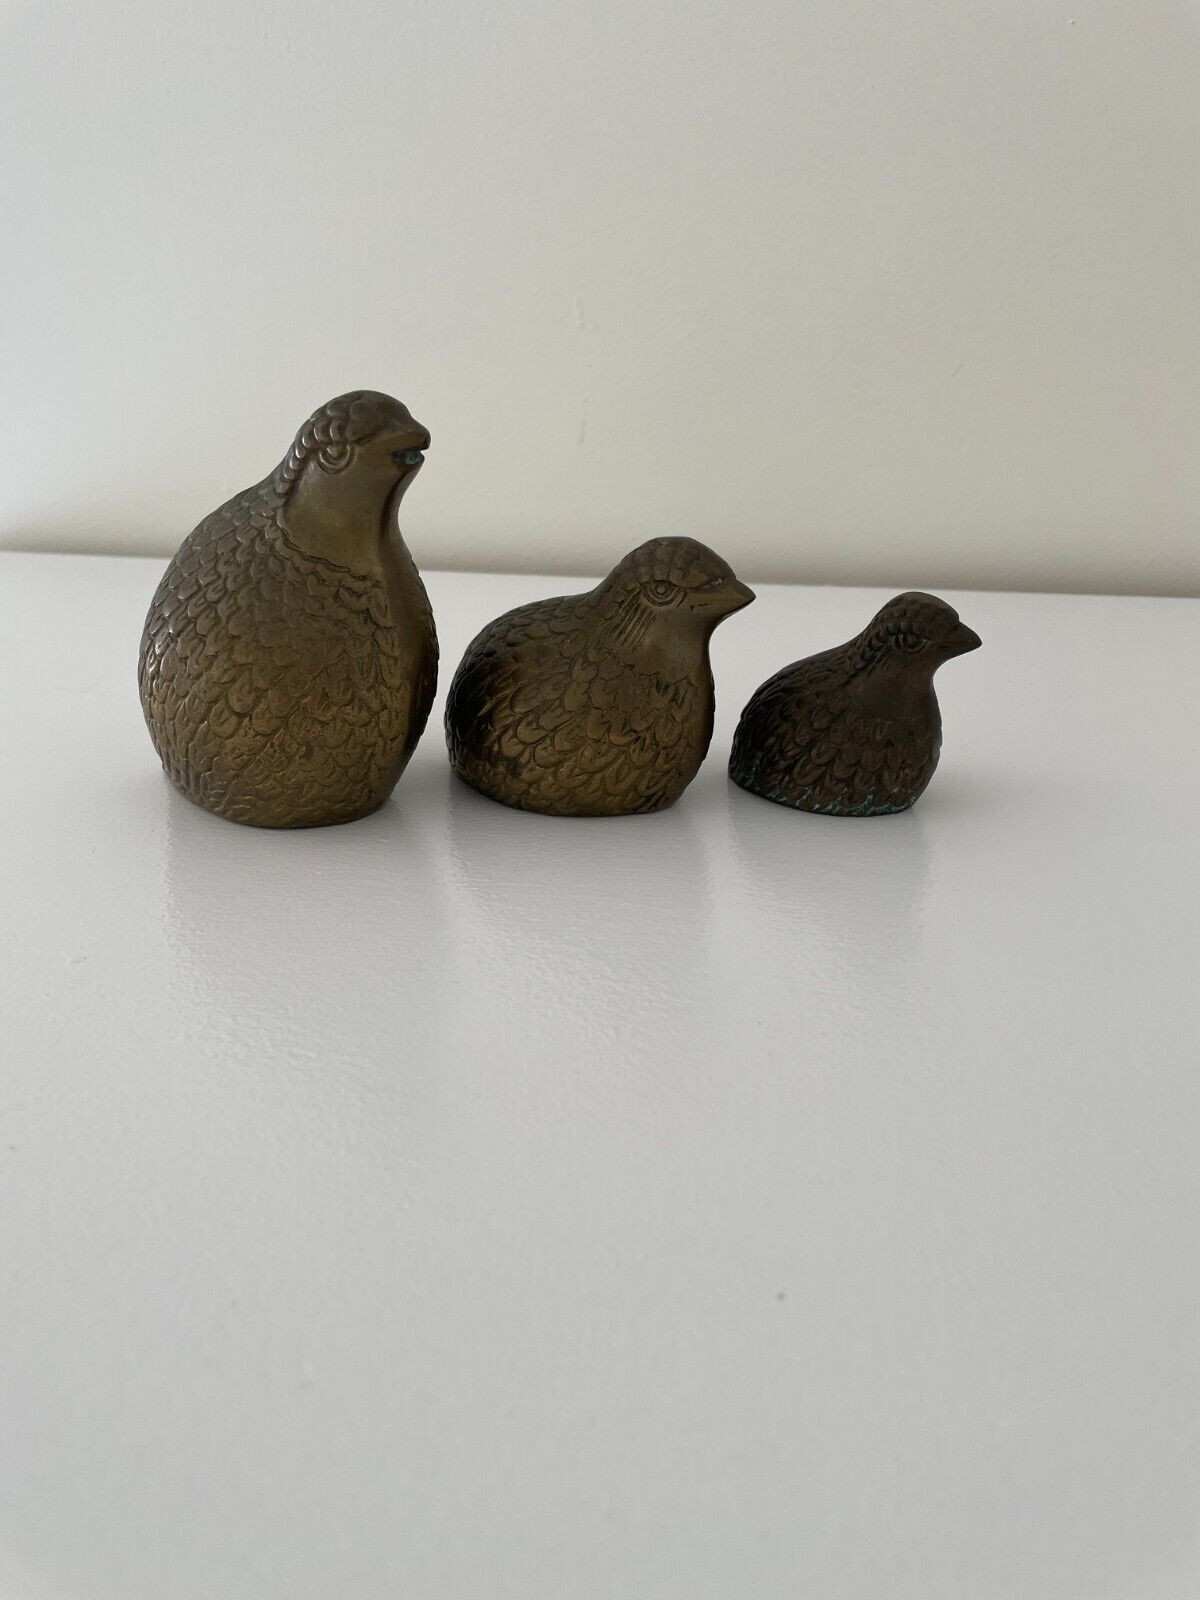 Vintage Brass Quail Partridges Bird Figurines Paperweights Set of 3 Family.